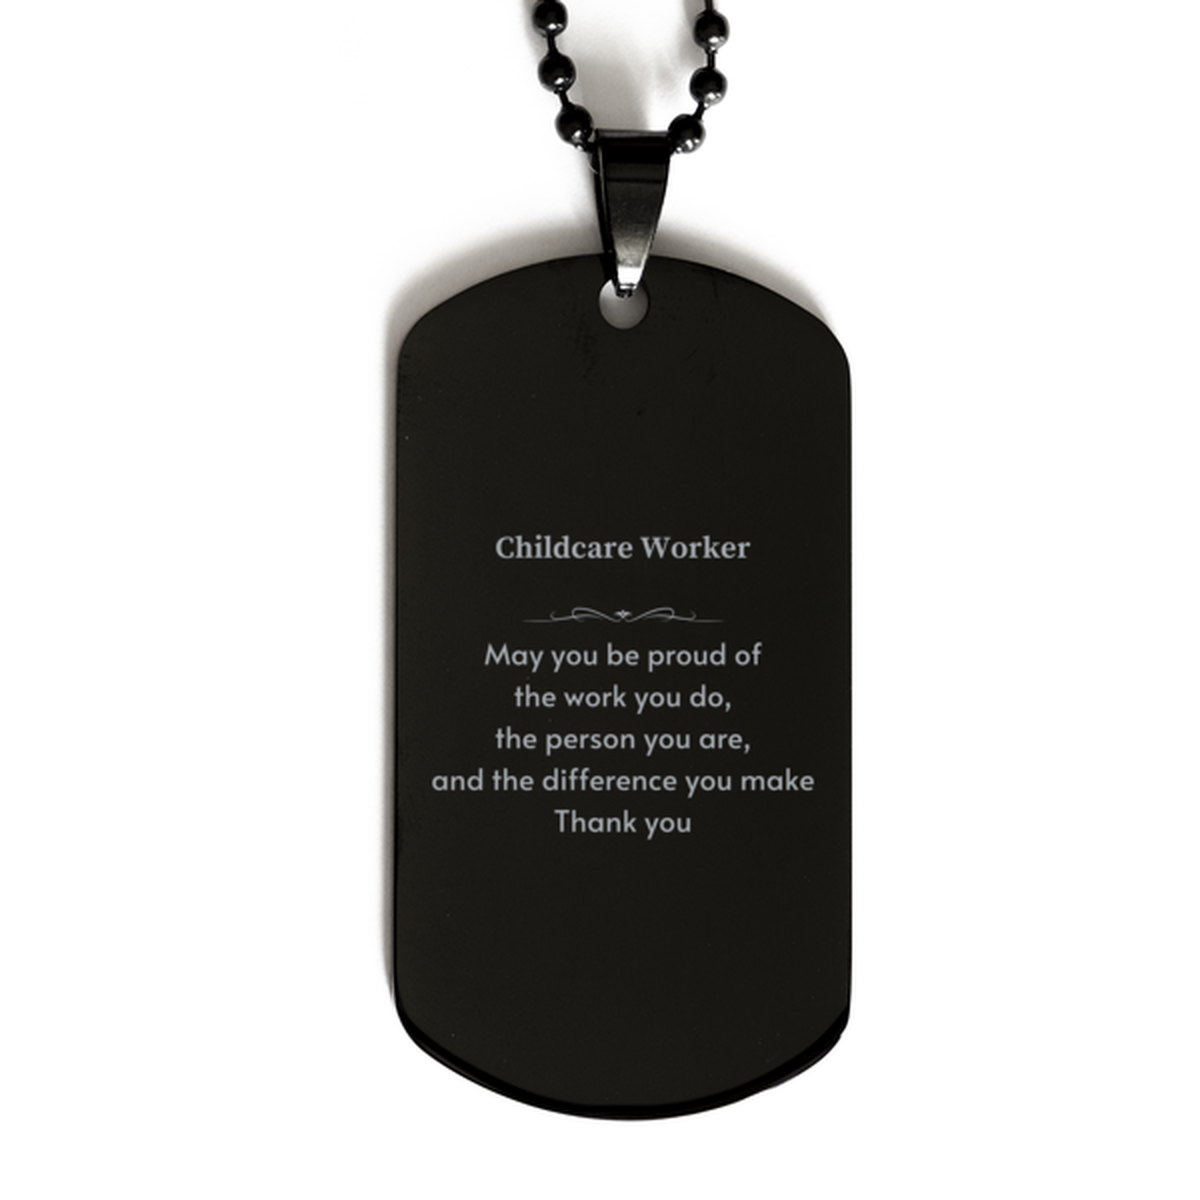 Heartwarming Black Dog Tag Retirement Coworkers Gifts for Childcare Worker, Childcare Worker May You be proud of the work you do, the person you are Gifts for Boss Men Women Friends